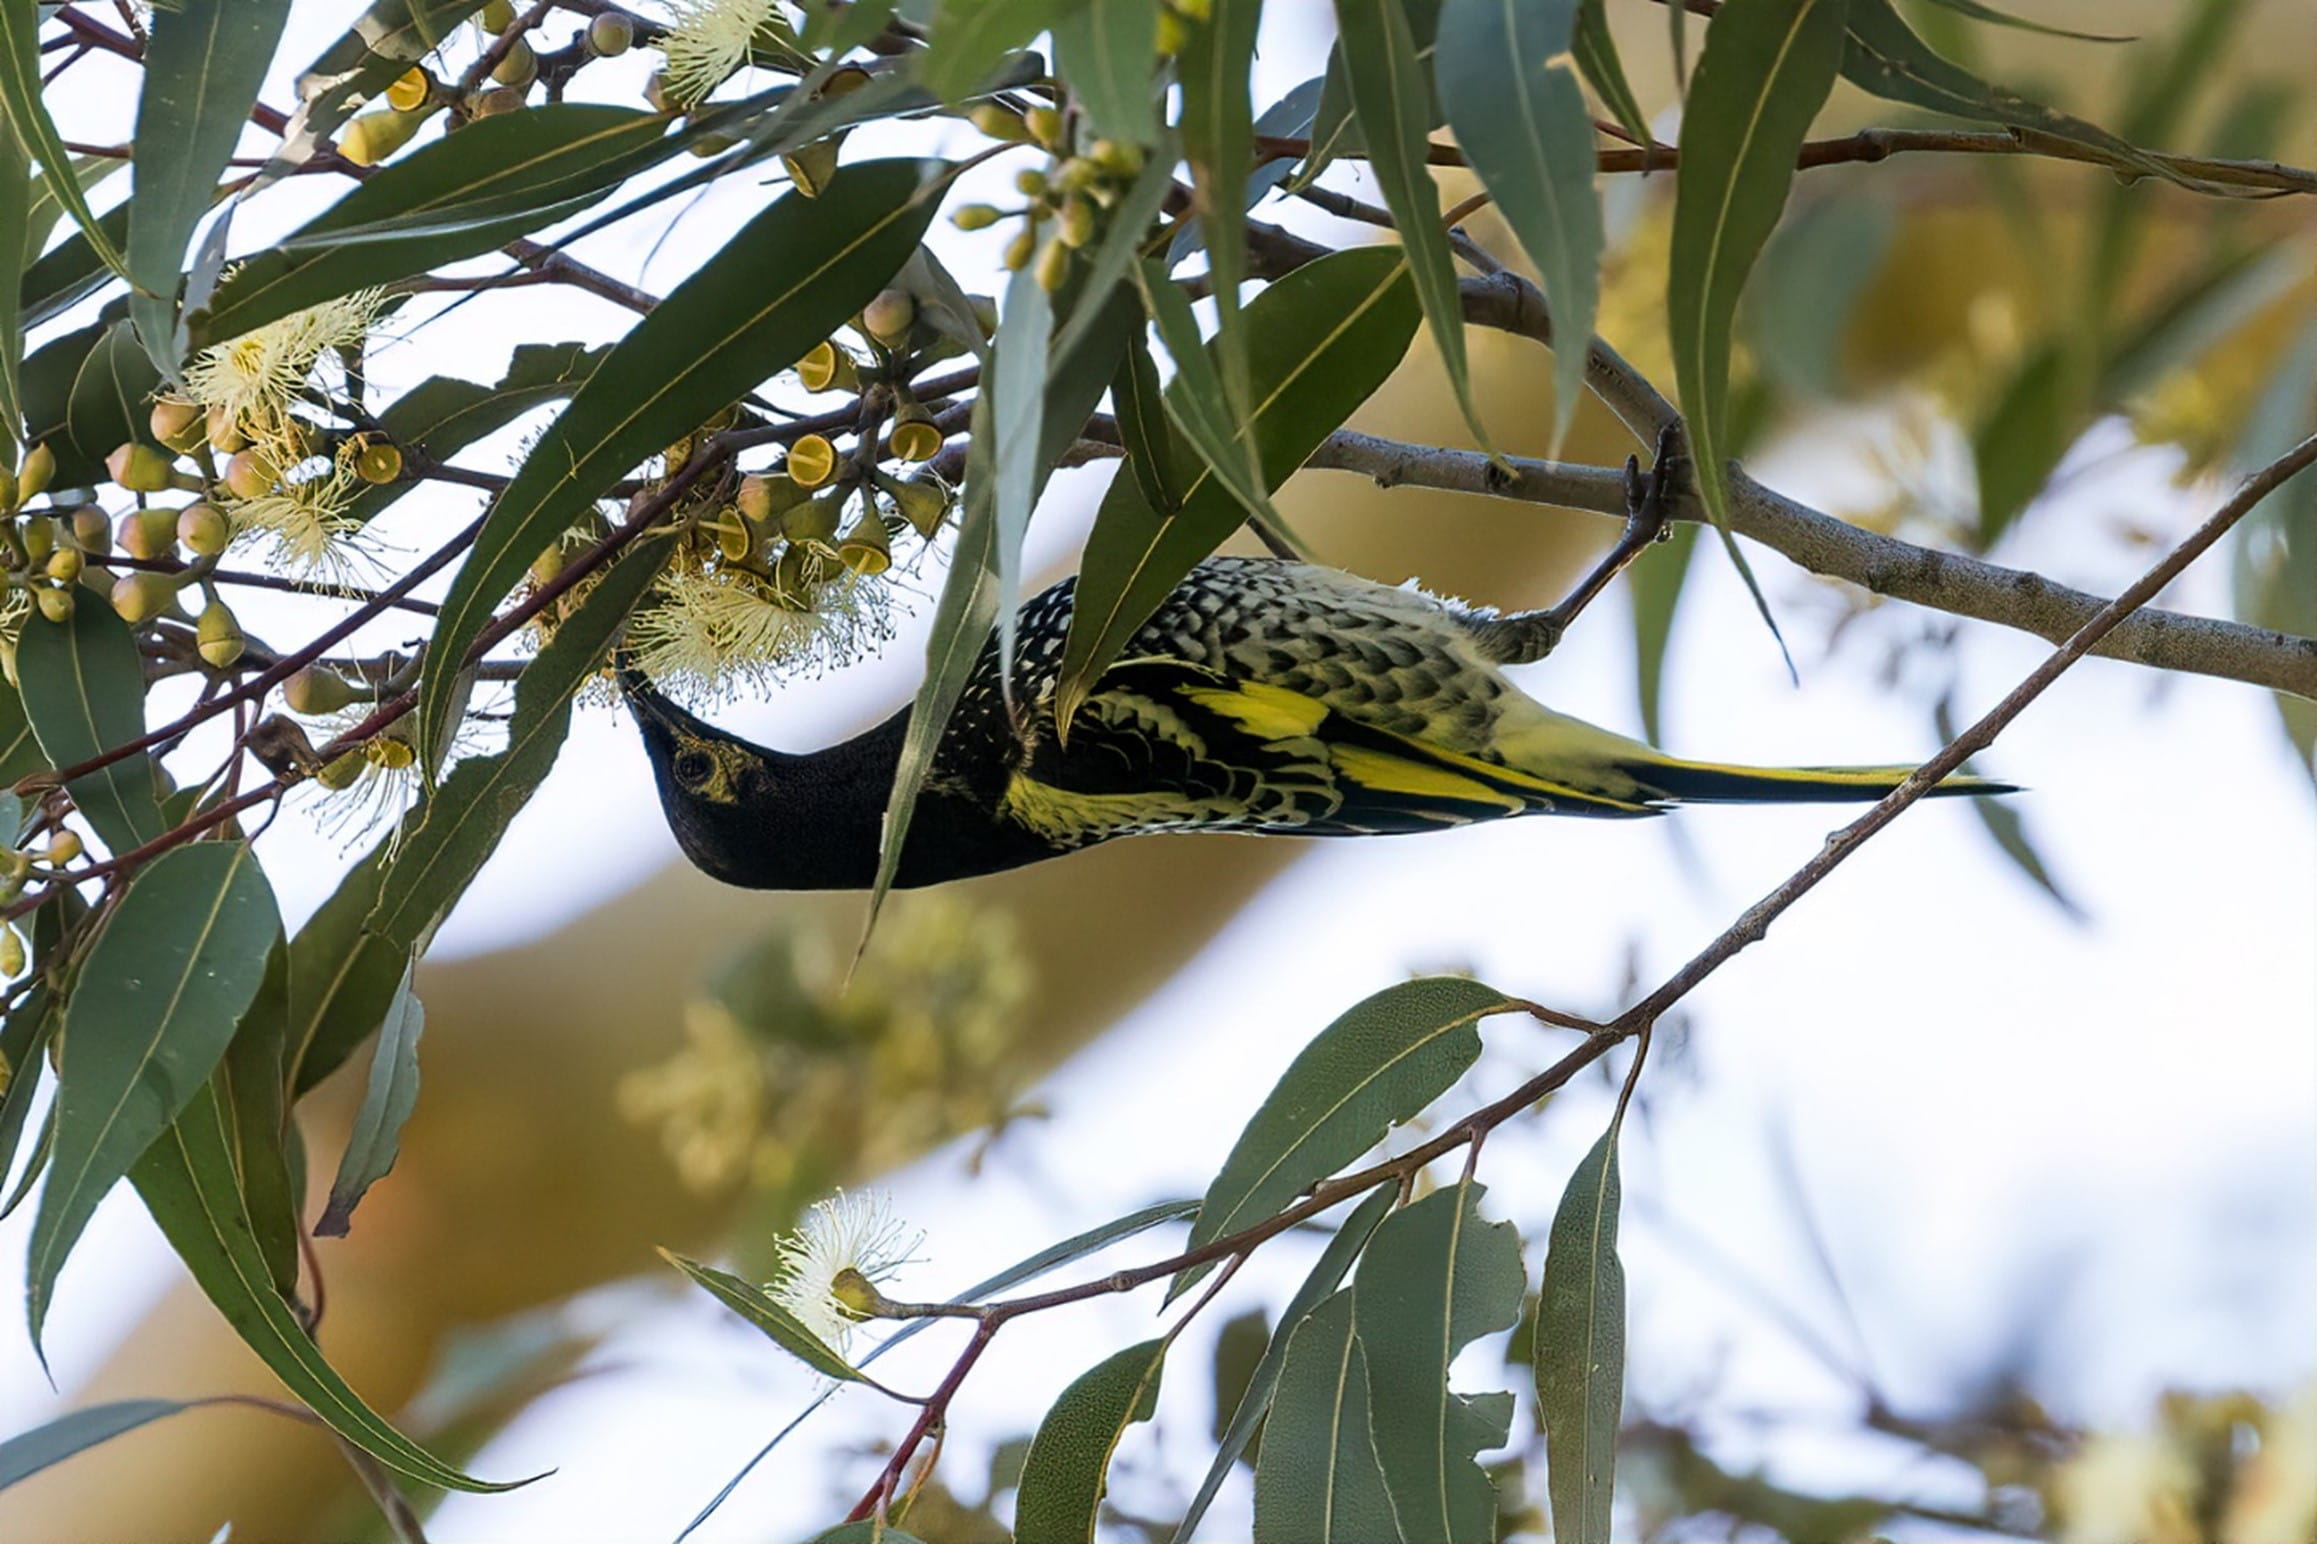 A small honeyeater is hanging upside down from the tree probing for nectar in flowers. 